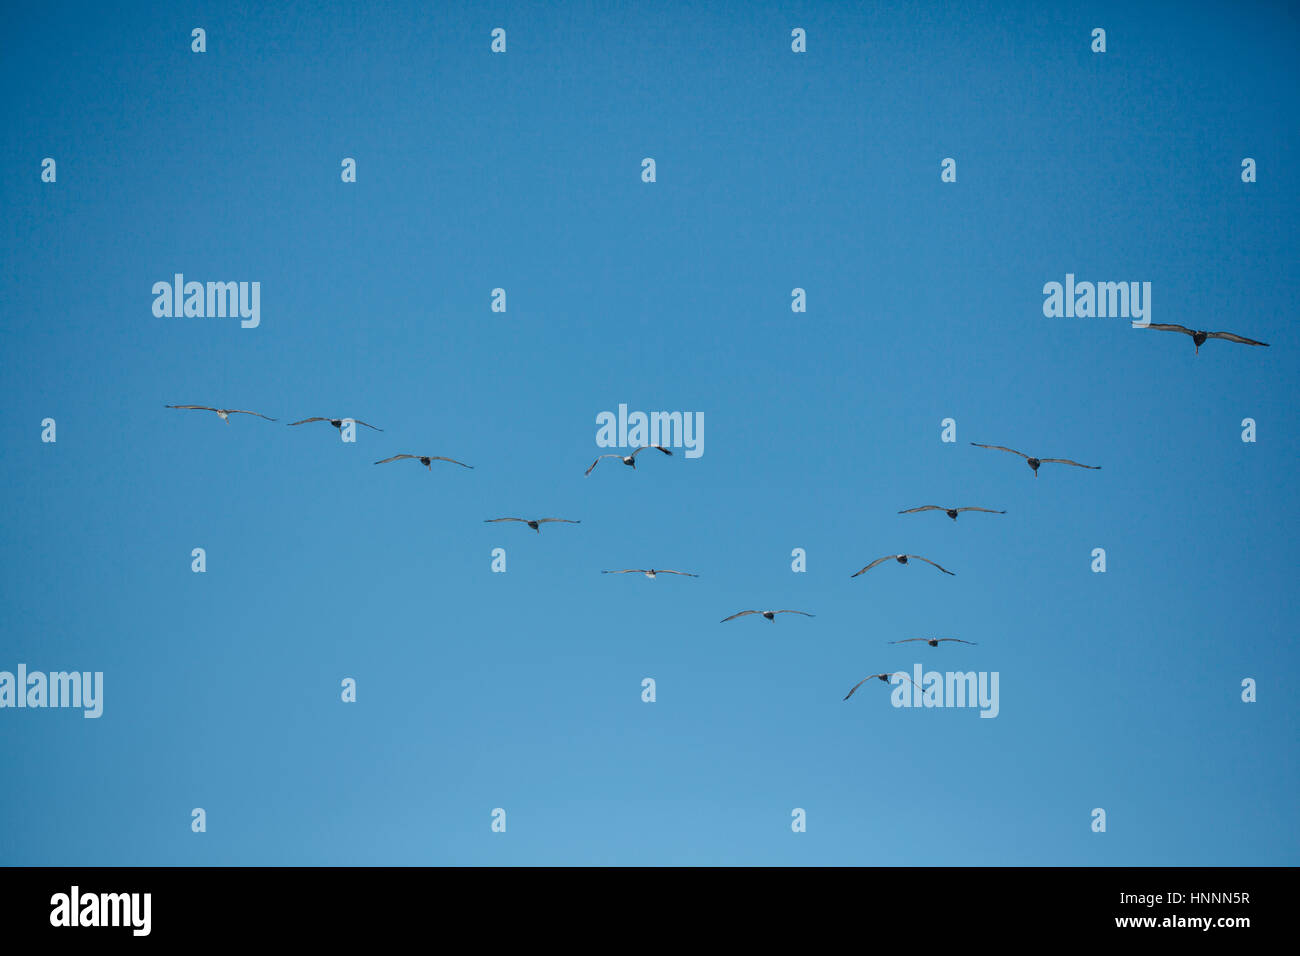 Flock of birds flying at clear blue sky Stock Photo